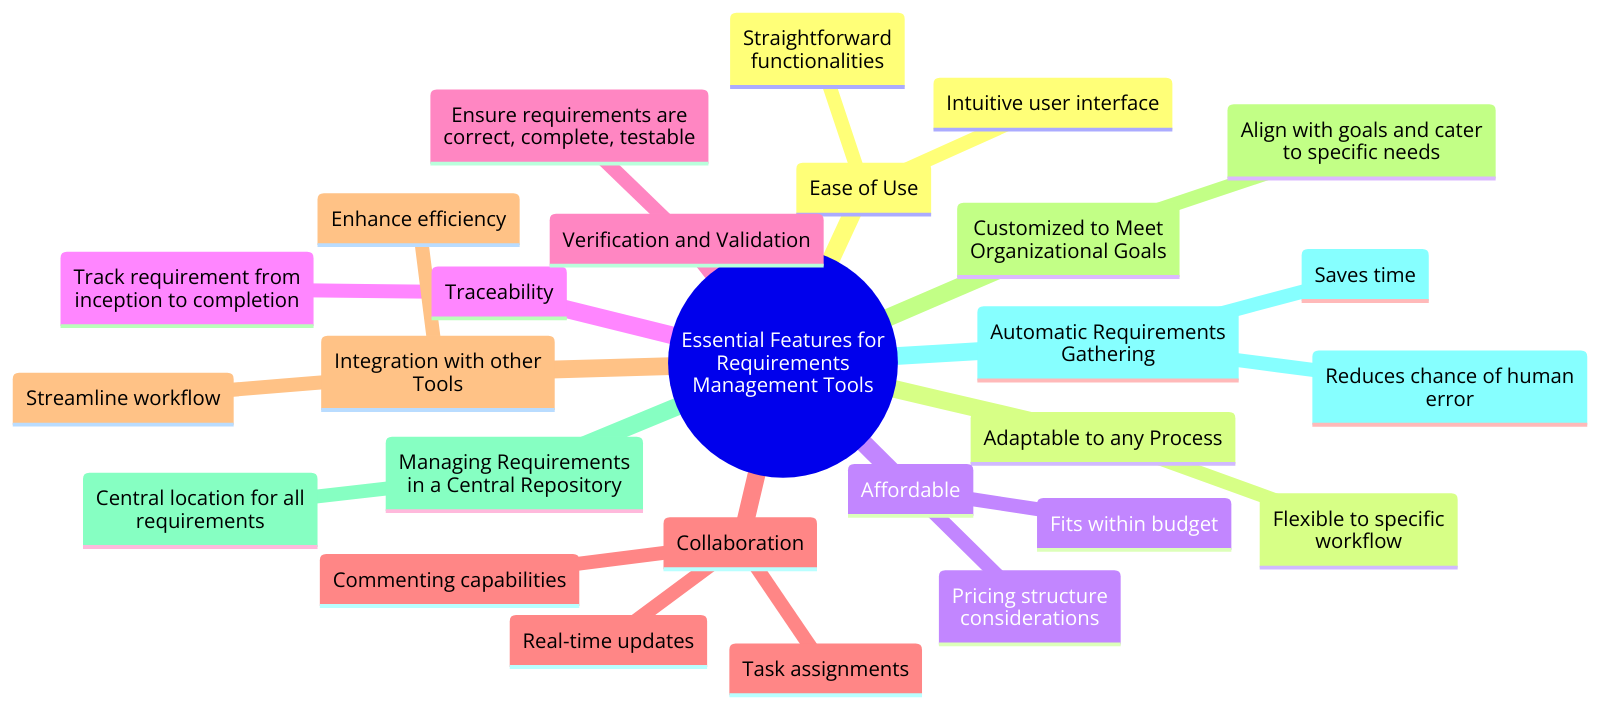 requirements software tools features